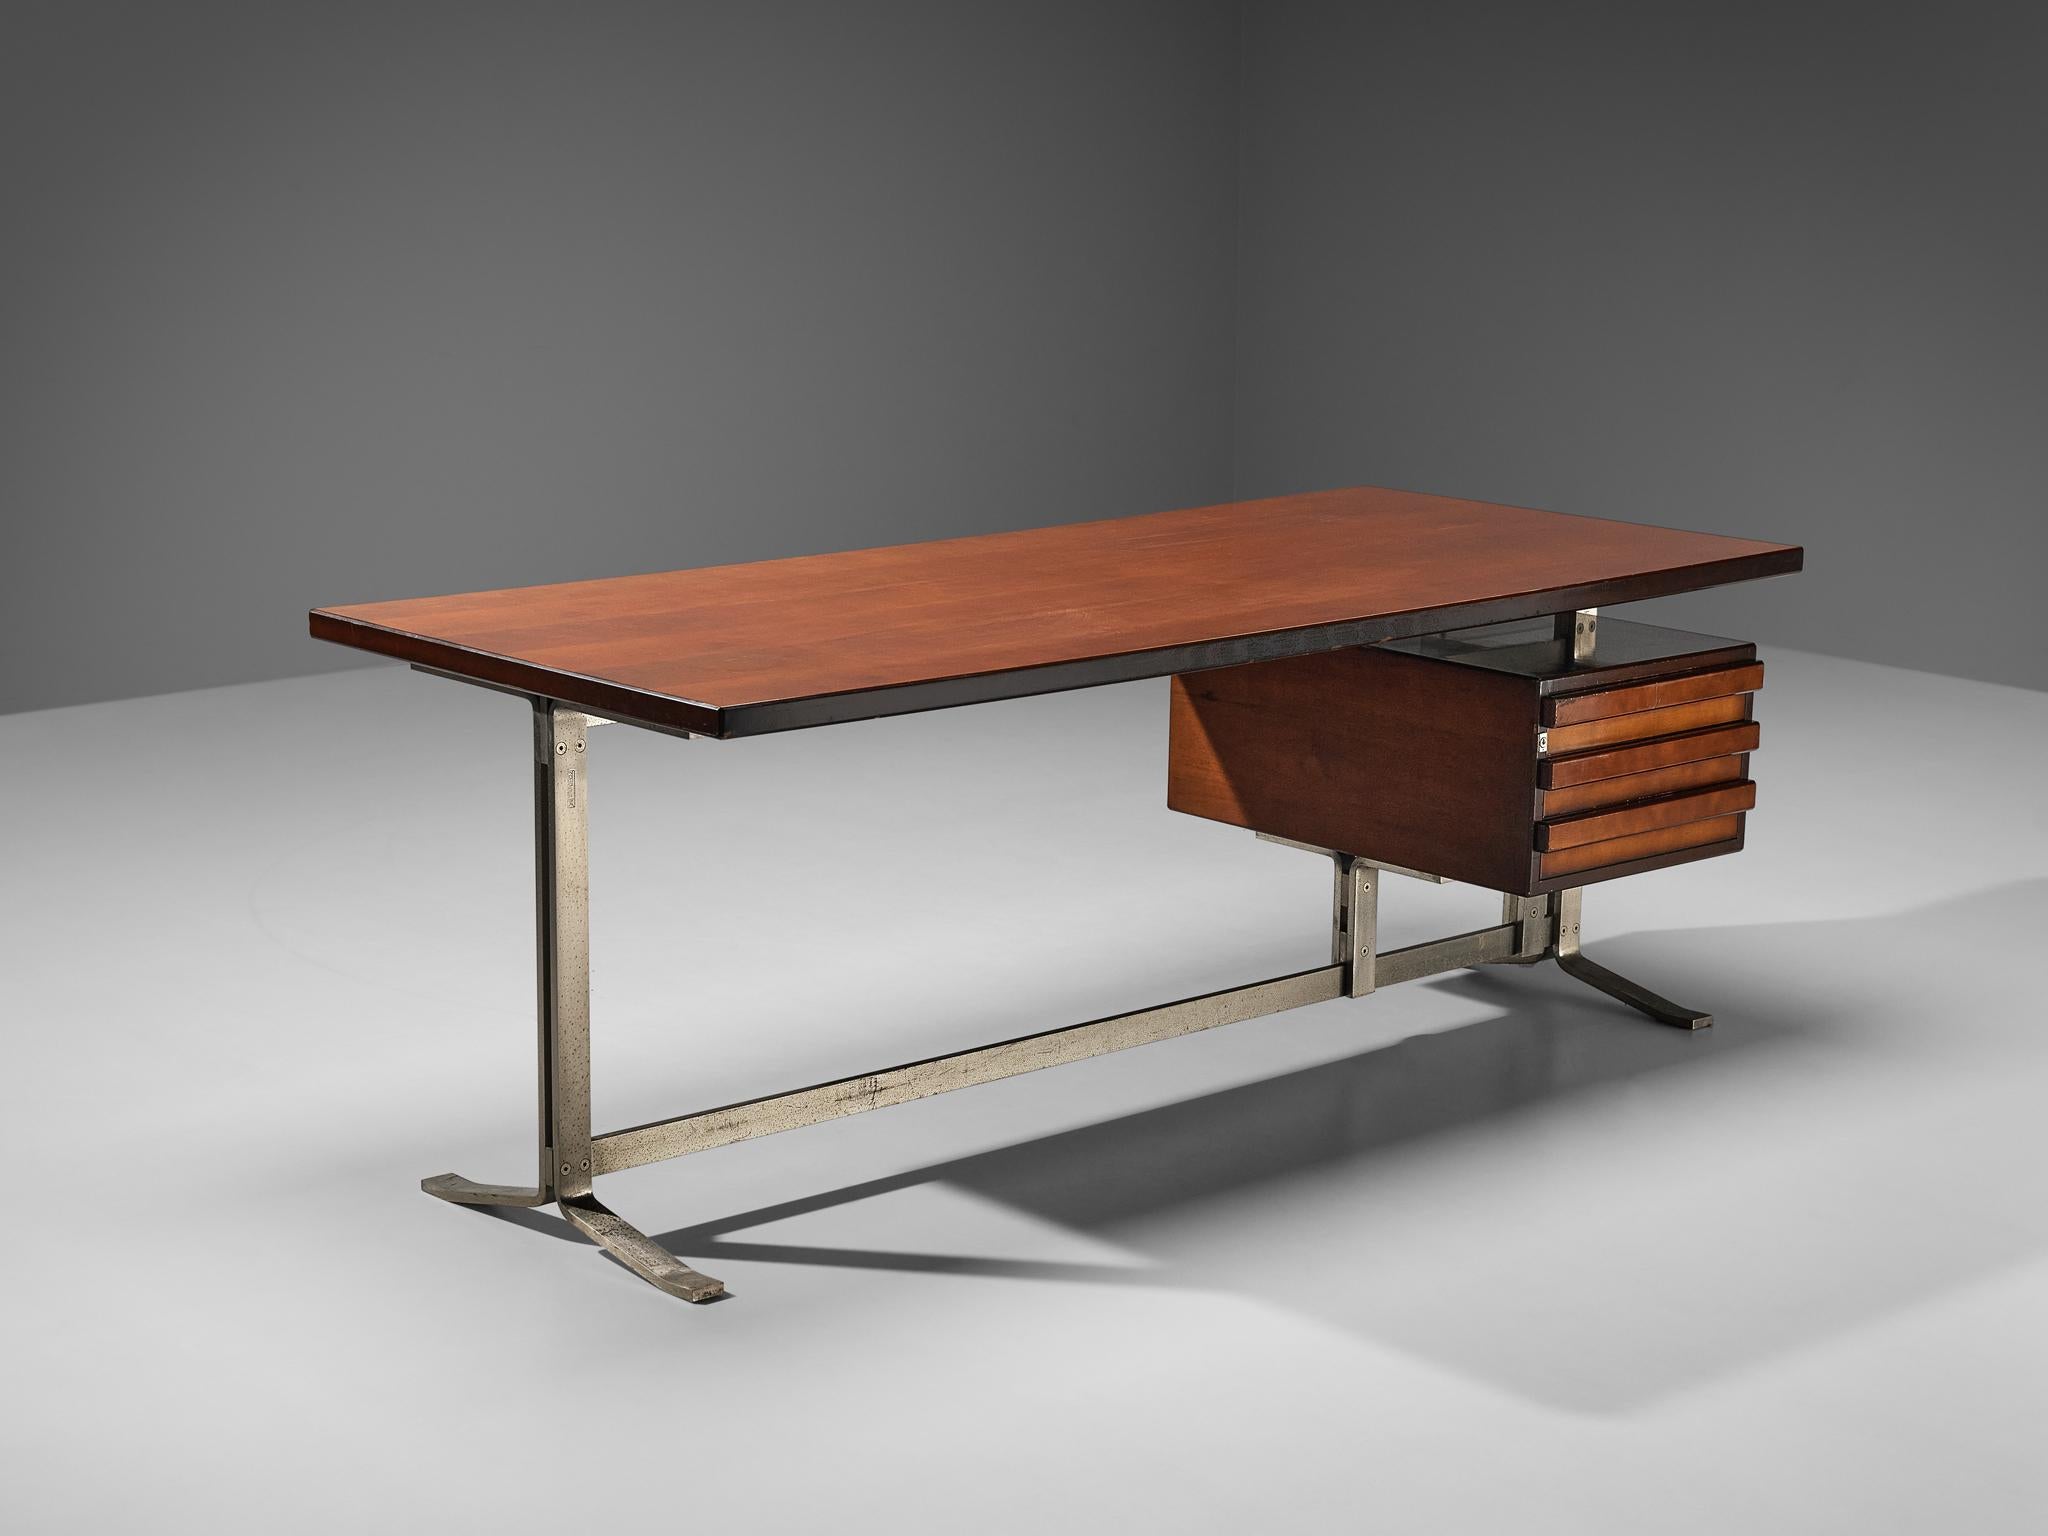 Gianni Moscatelli for Formanova, desk, black lacquered wood, nickel-plated steel, Italy, 1960s

This modern, streamlined writing desk is designed by Gianni Moscatelli in the sixties. Its notable feature is a spacious tabletop, firmly affixed to a